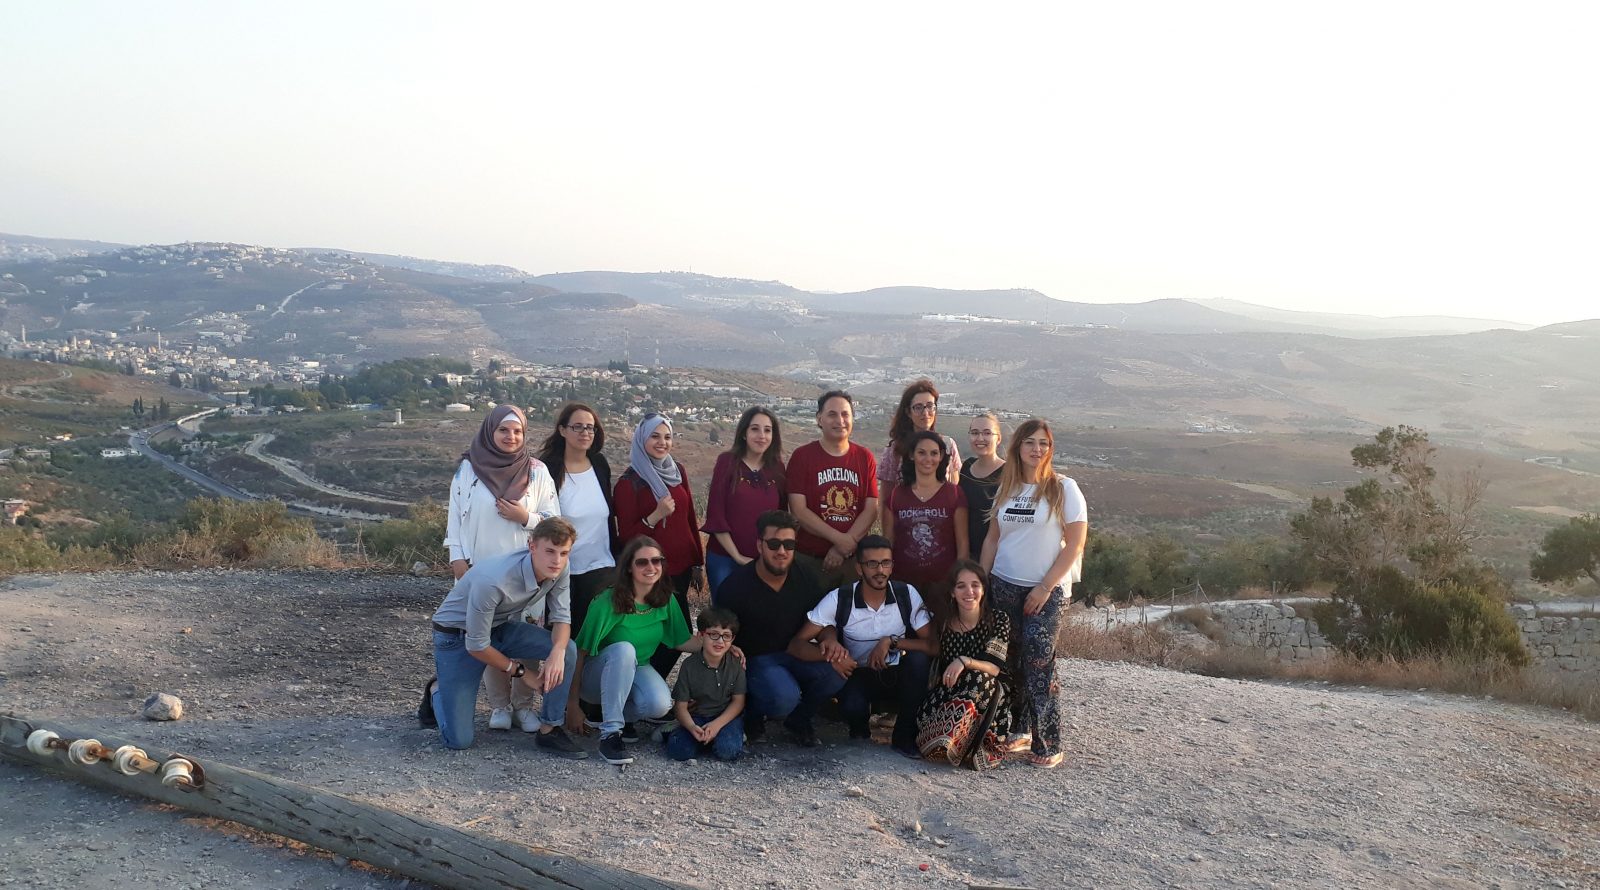 Zajel Concludes the Activities of Its 3rd International Summer Camp 2018